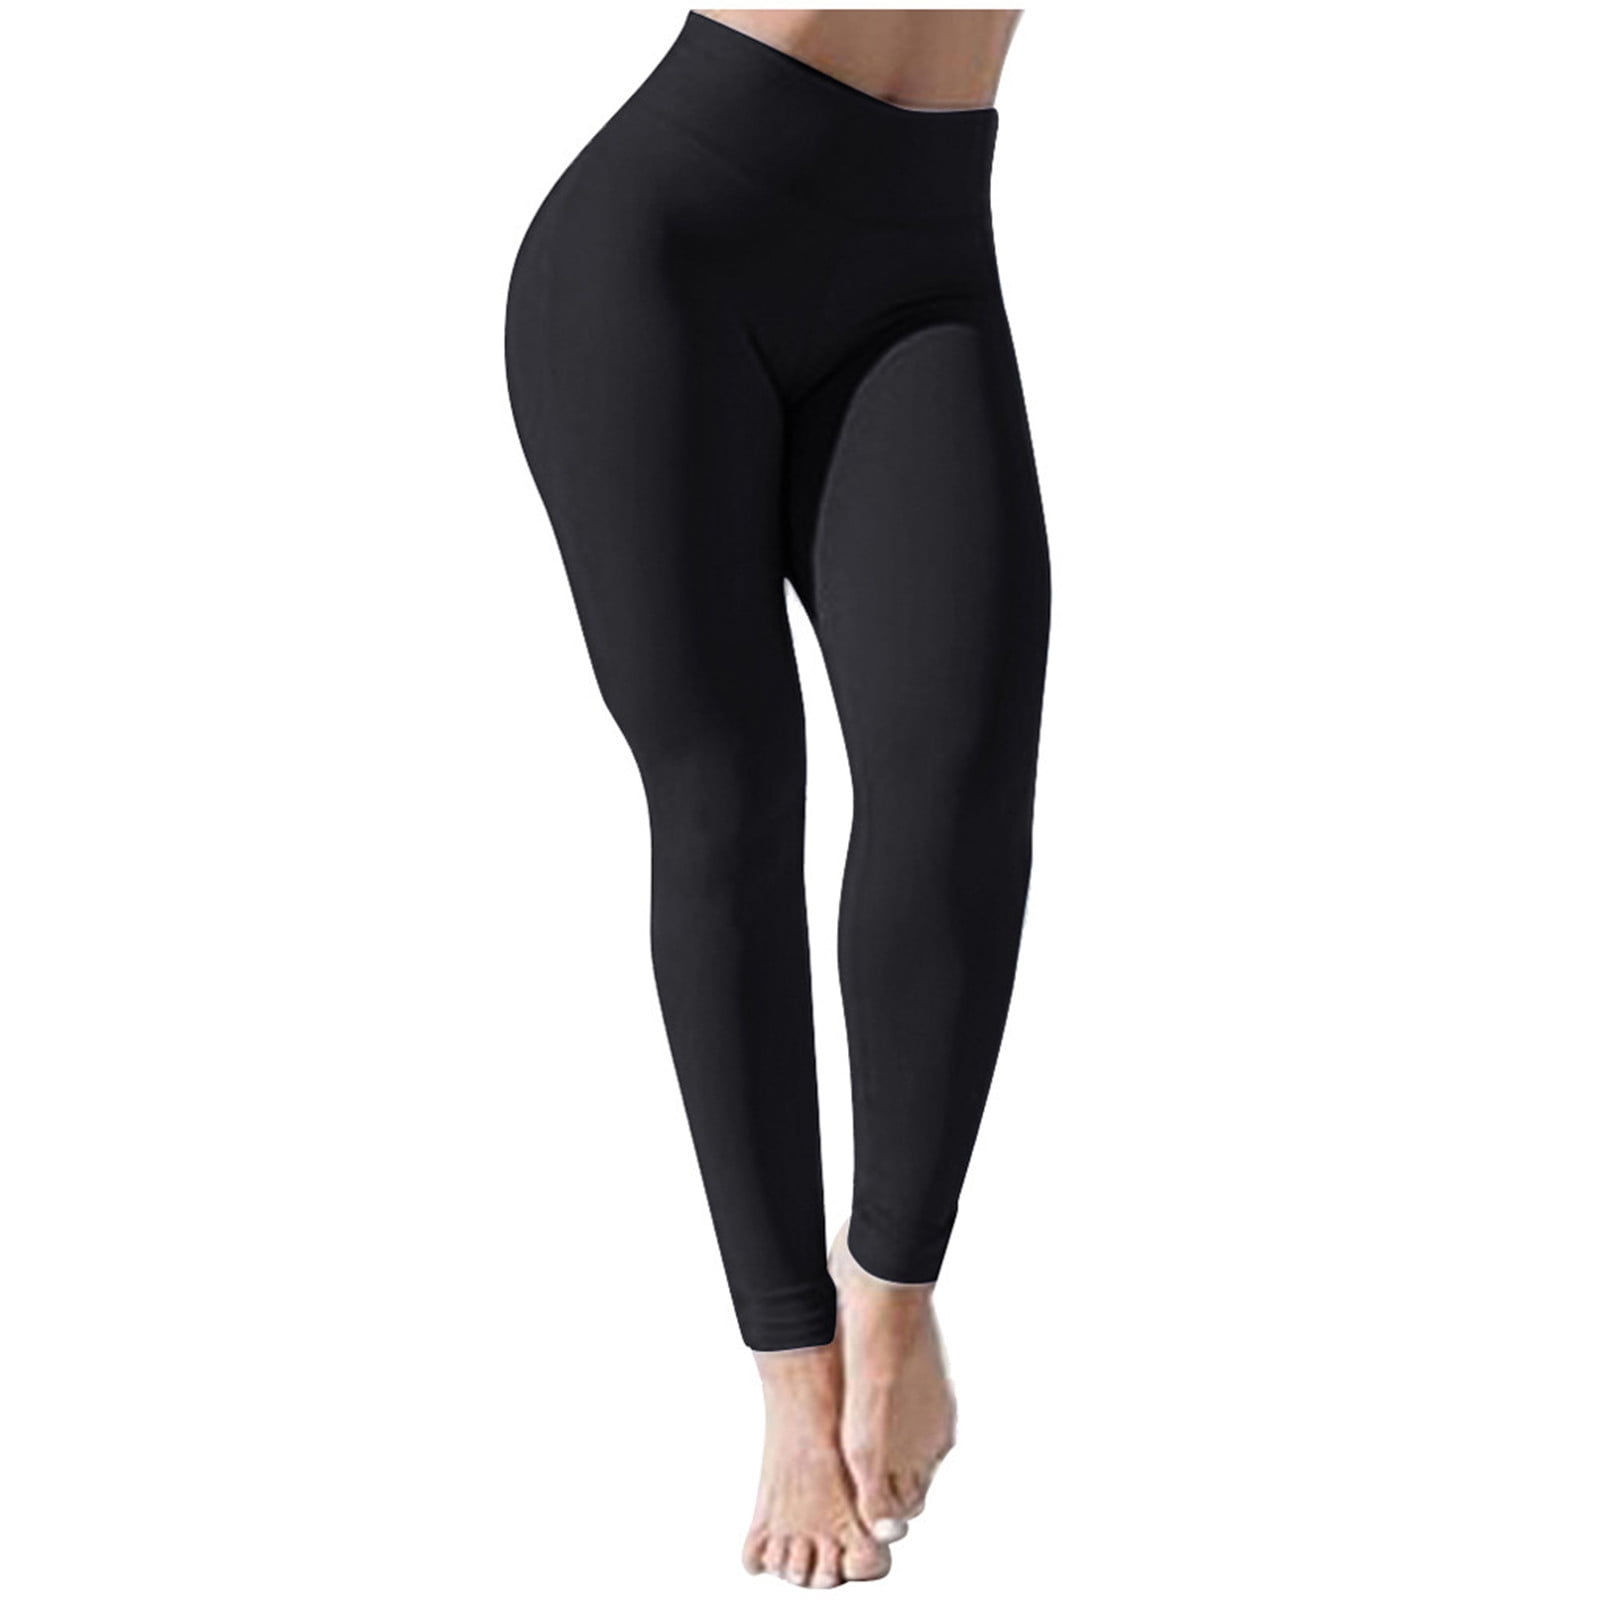 SELONE Workout Leggings for Women Workout Butt Lifting Jumpsuits High Waist  Casual Sports Yogalicious Super Soft Utility Dressy Everyday Soft Lifting